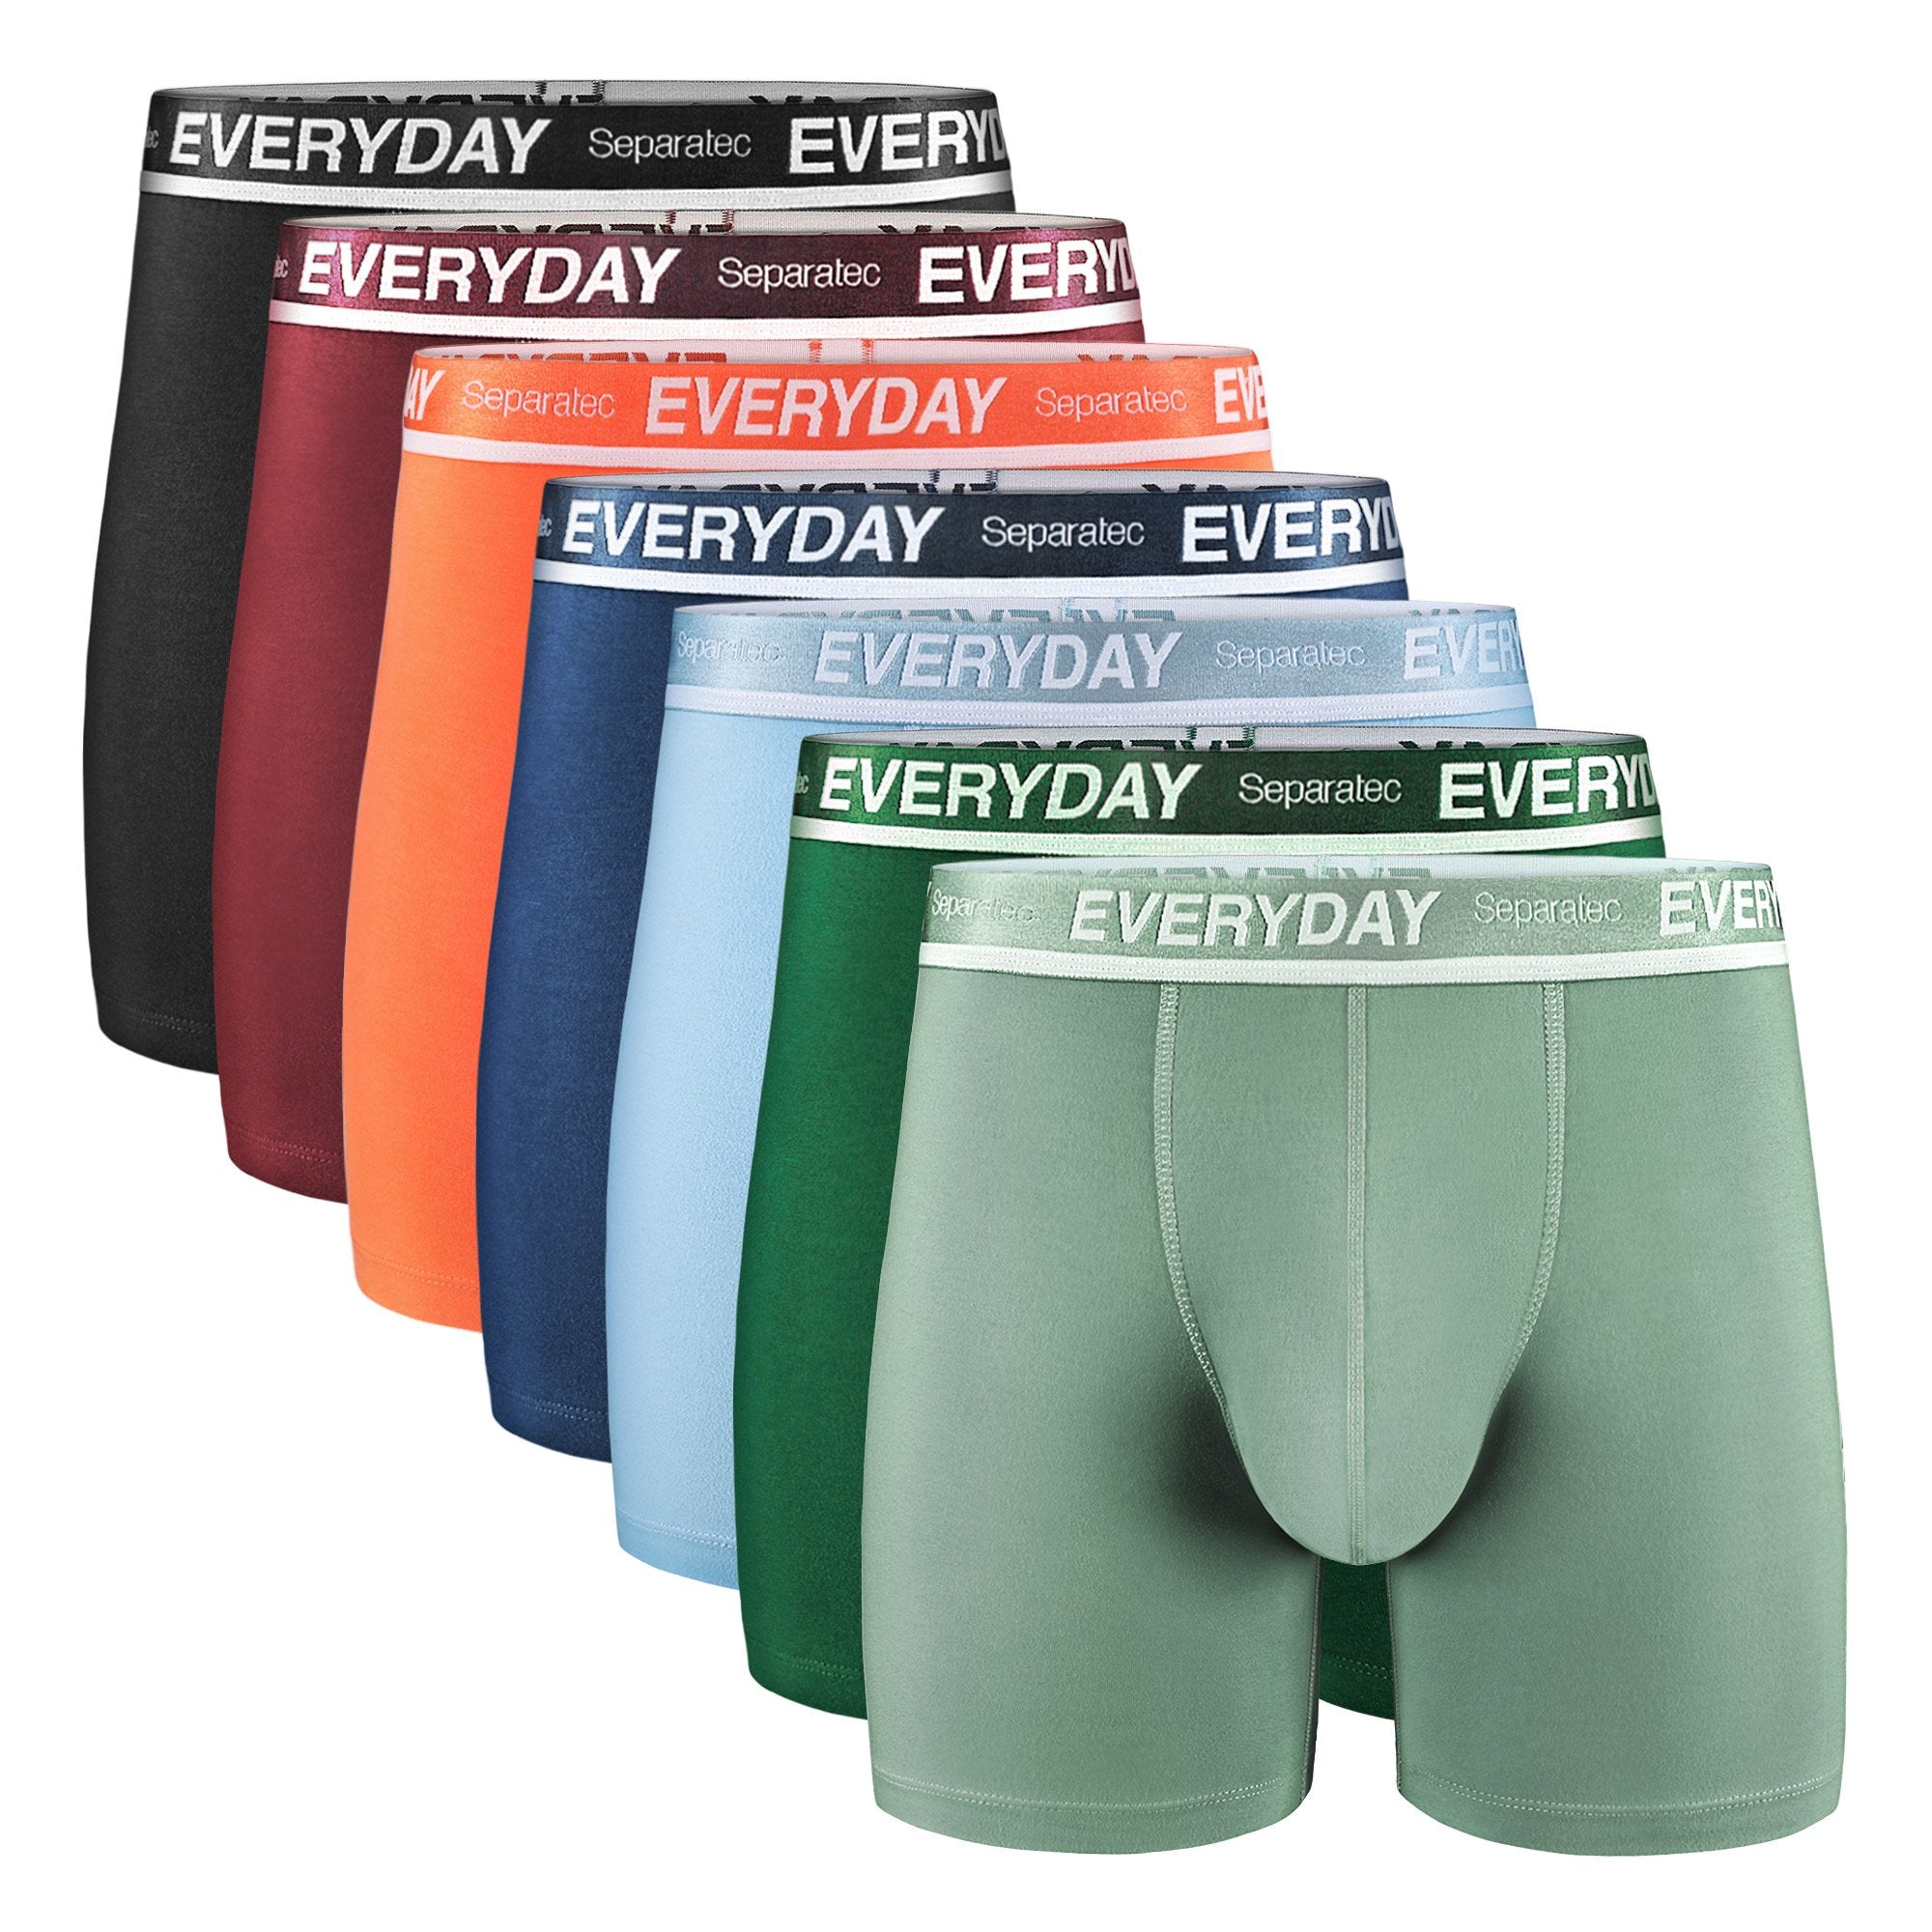 Separatec Men's Cotton Stretch Underwear 7 Pack Colorful - Import It All